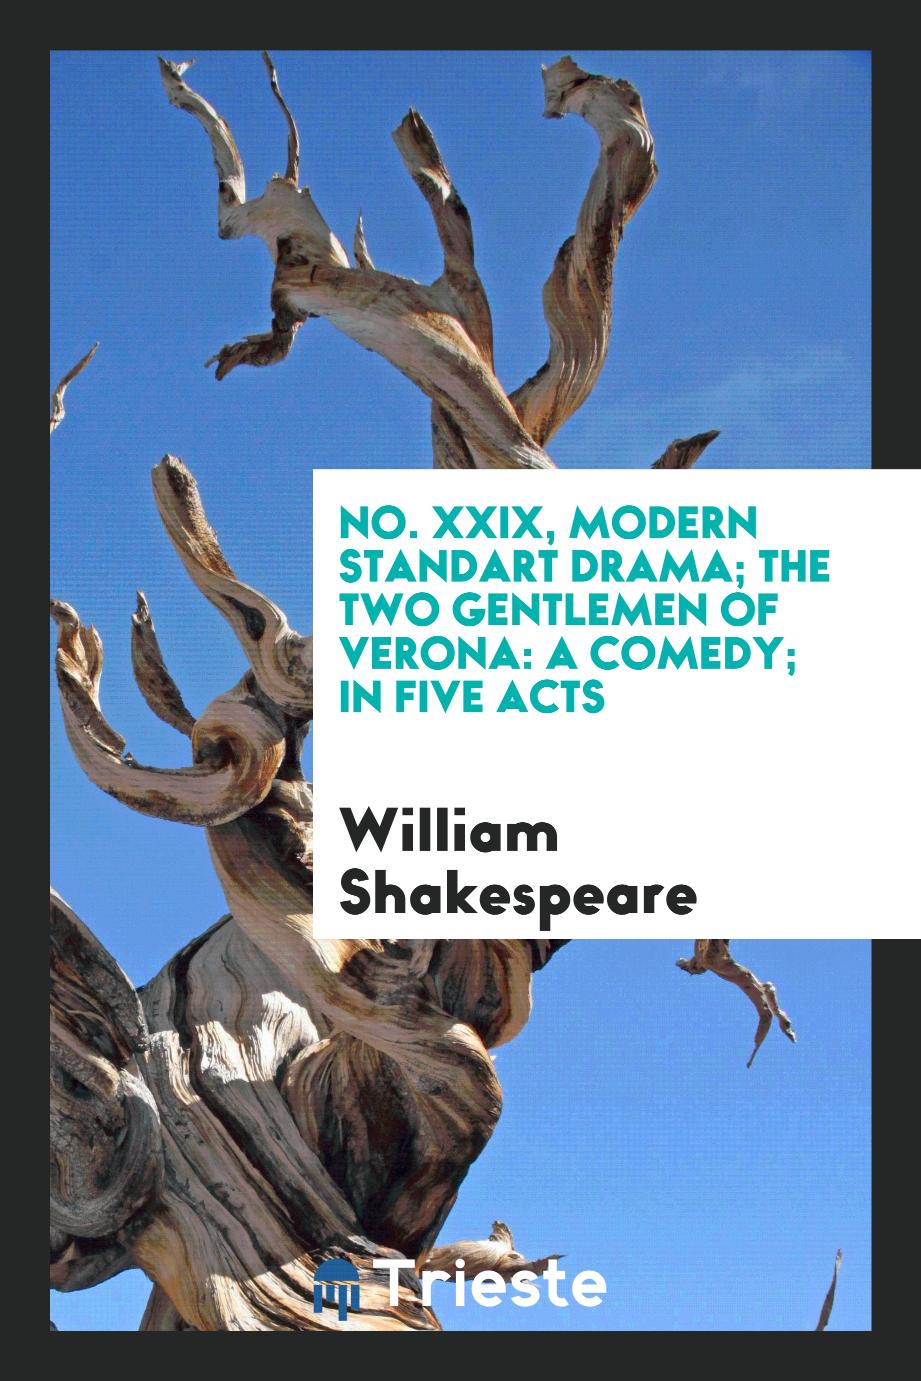 No. XXIX, Modern standart drama; The Two Gentlemen of Verona: A Comedy; in Five Acts